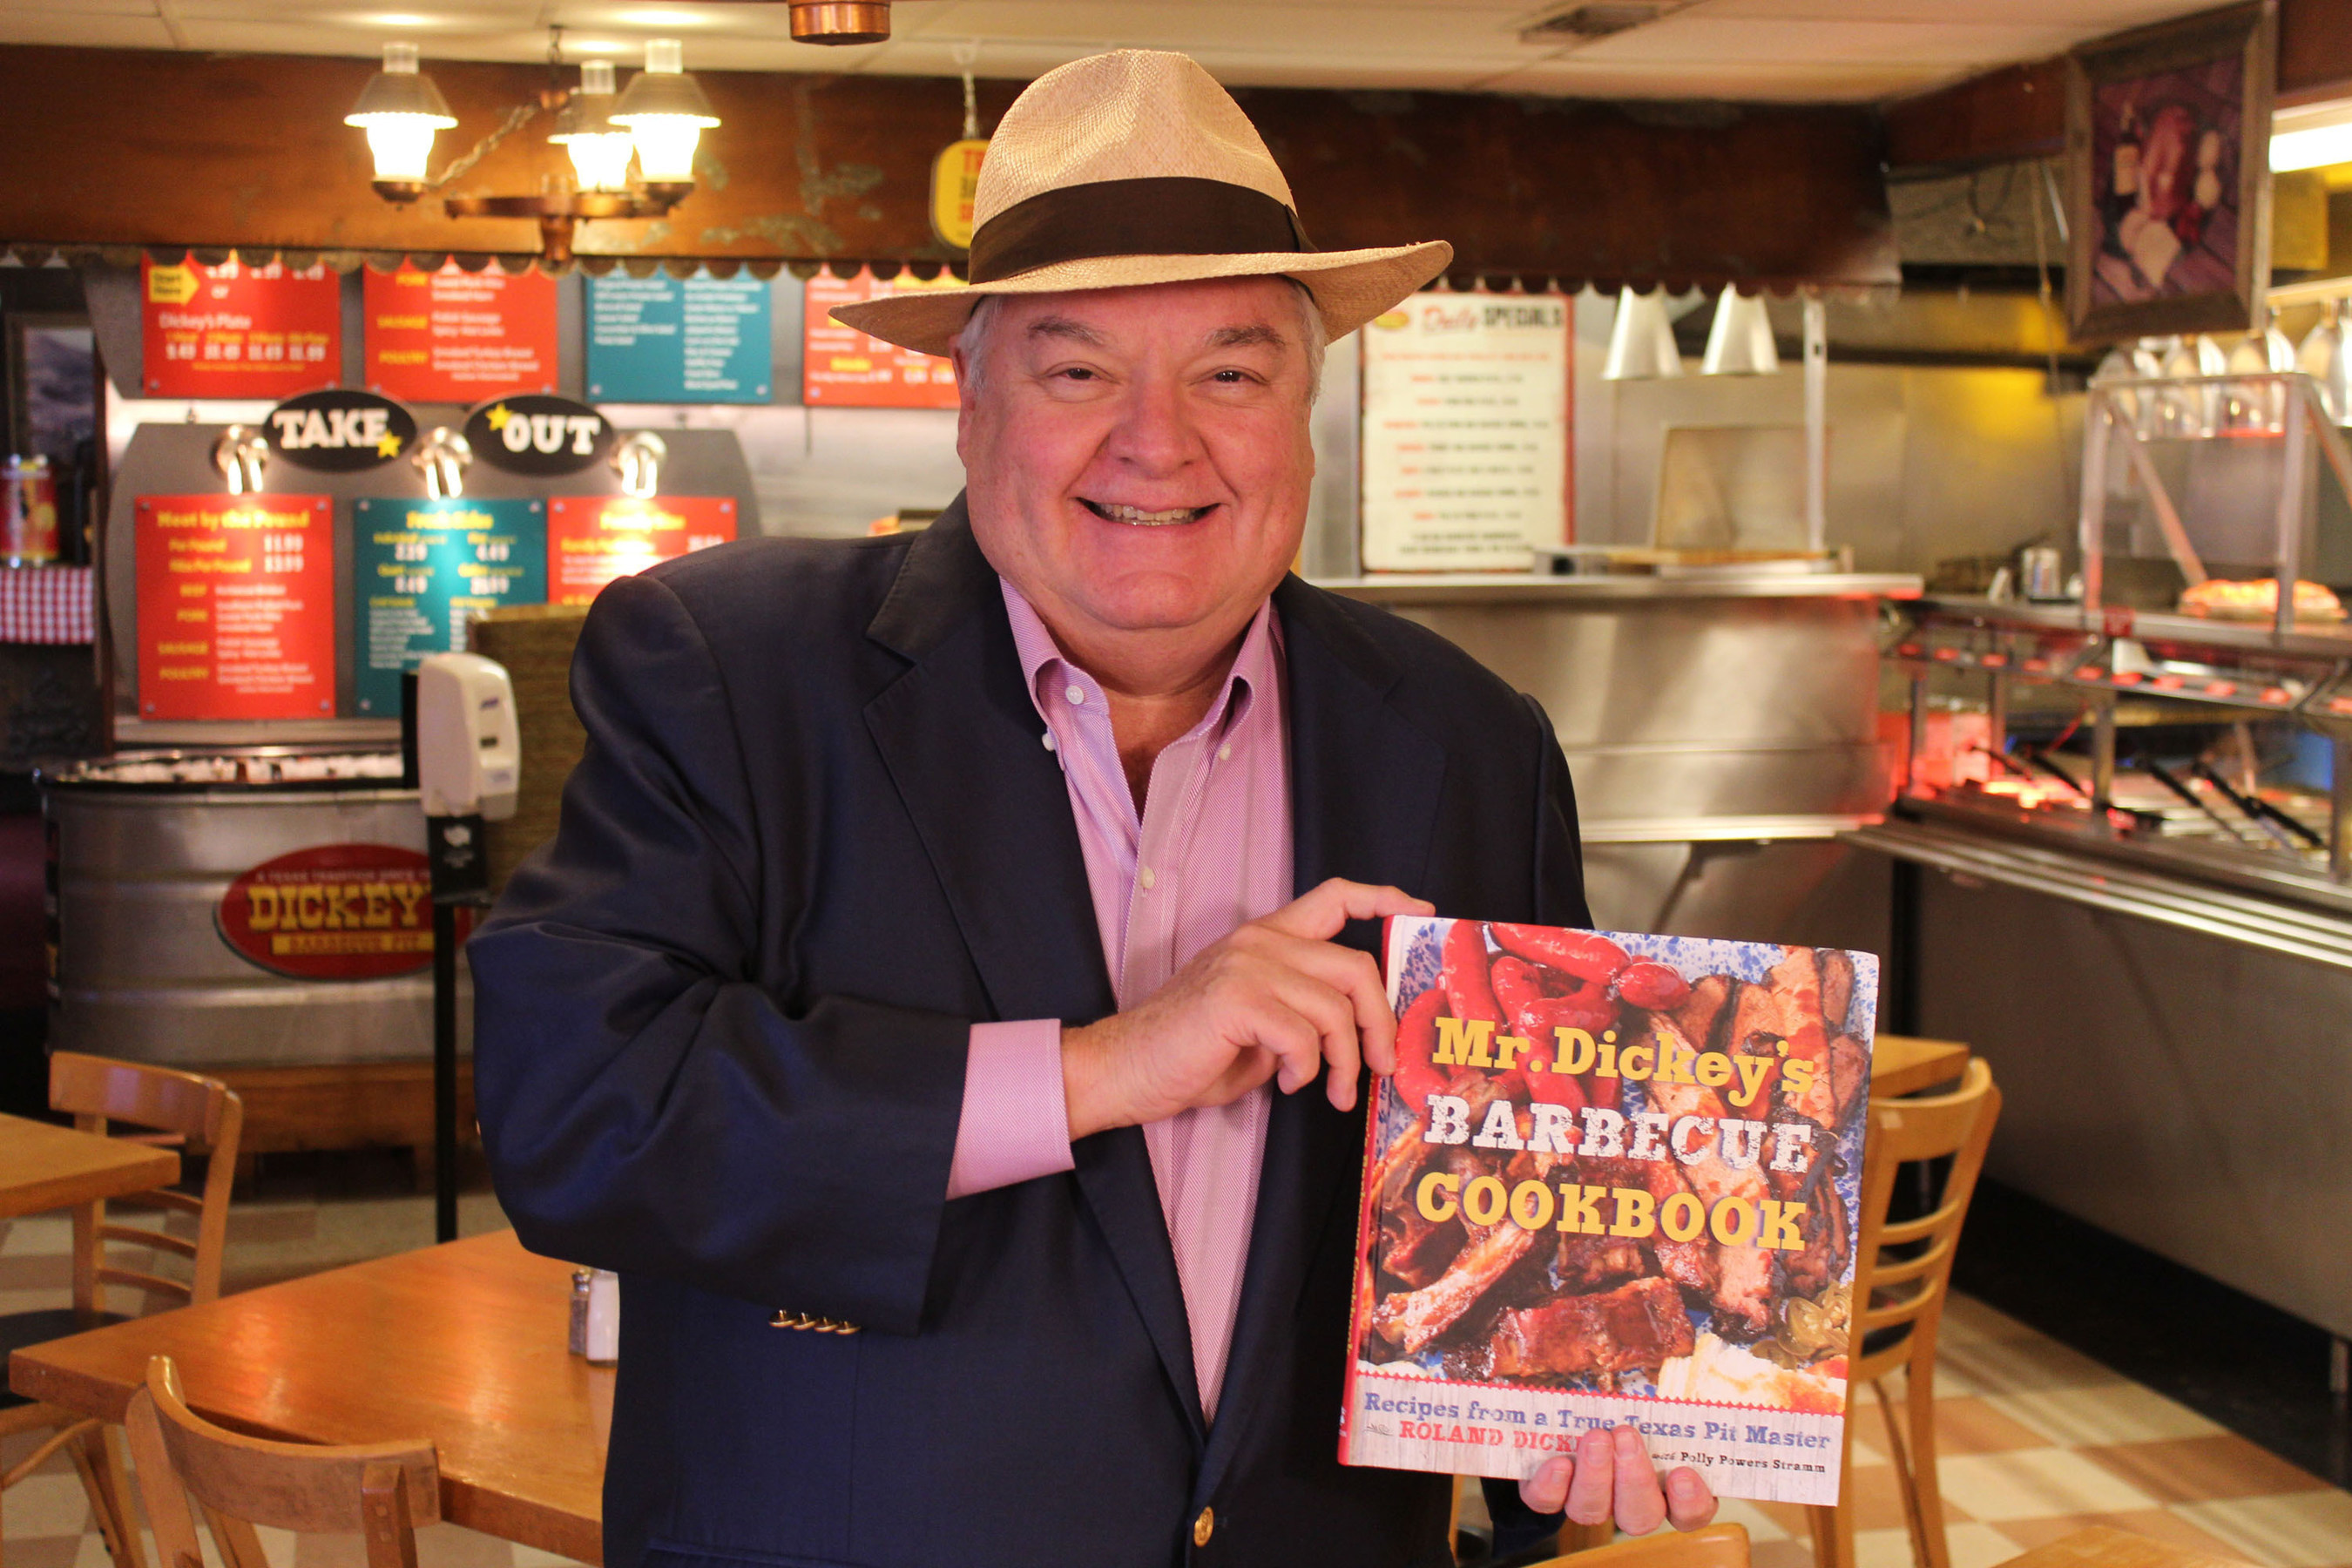 Mr. Dickey heads to Florida for the five year anniversary of our Wesley Chapel location. Party includes 100 autographed cookbooks and a chance to win free barbecue for an entire year.